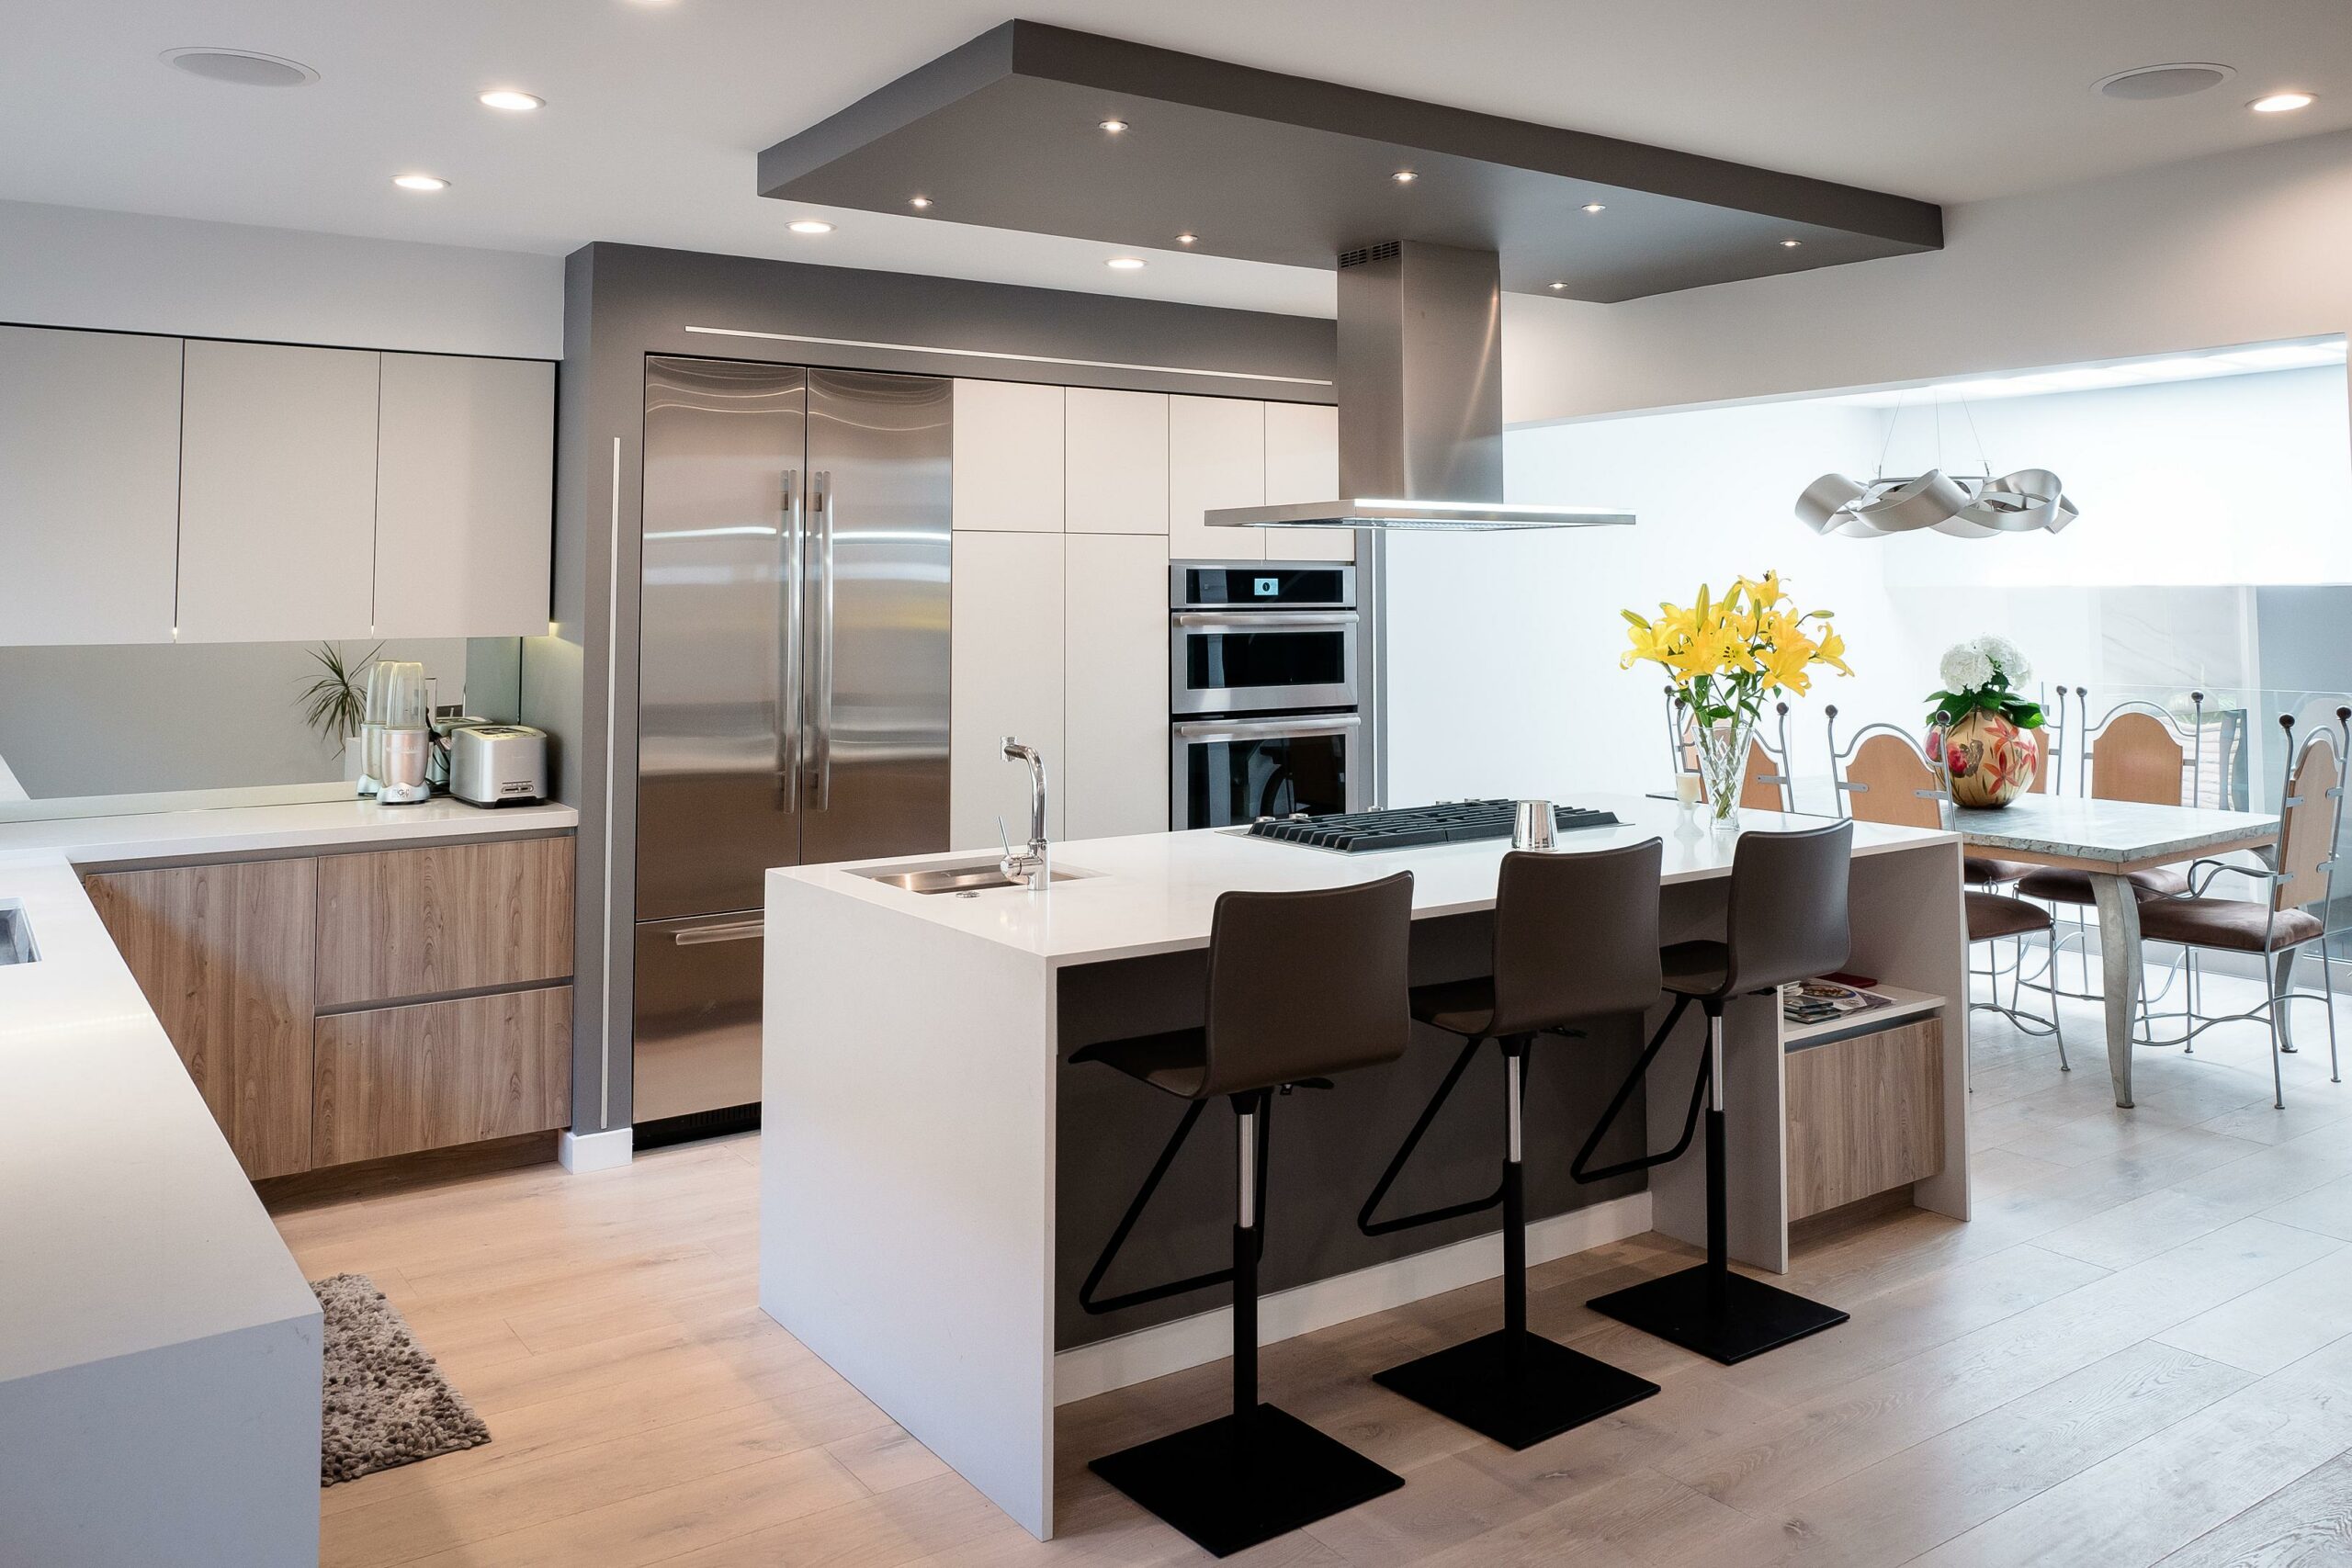 Modern kitchen interior with island and stainless appliances.